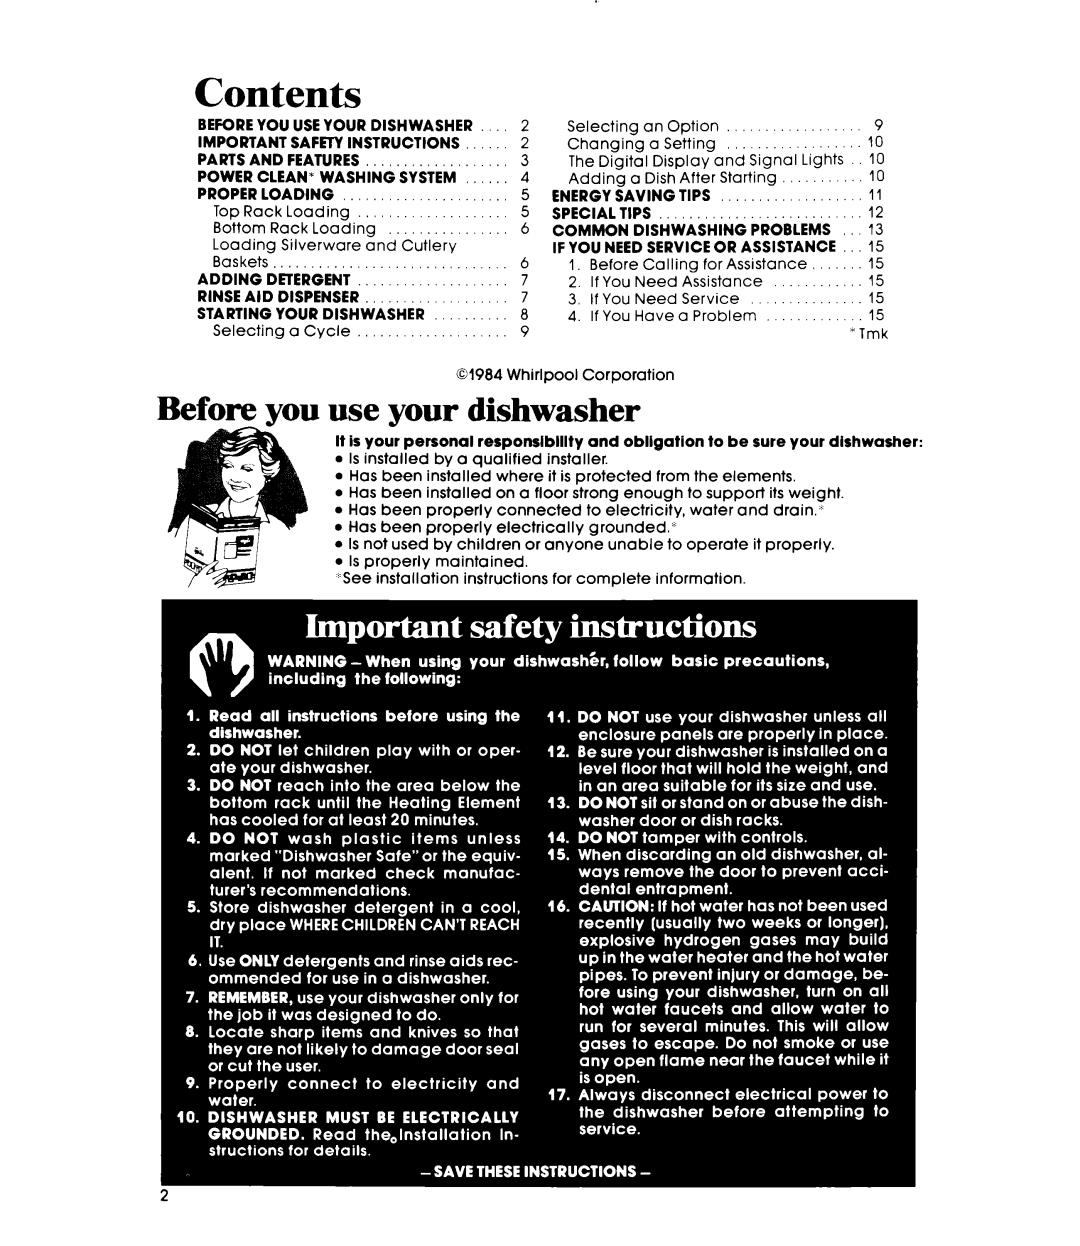 Whirlpool DU9903XL manual Contents, Before you use your dishwasher 